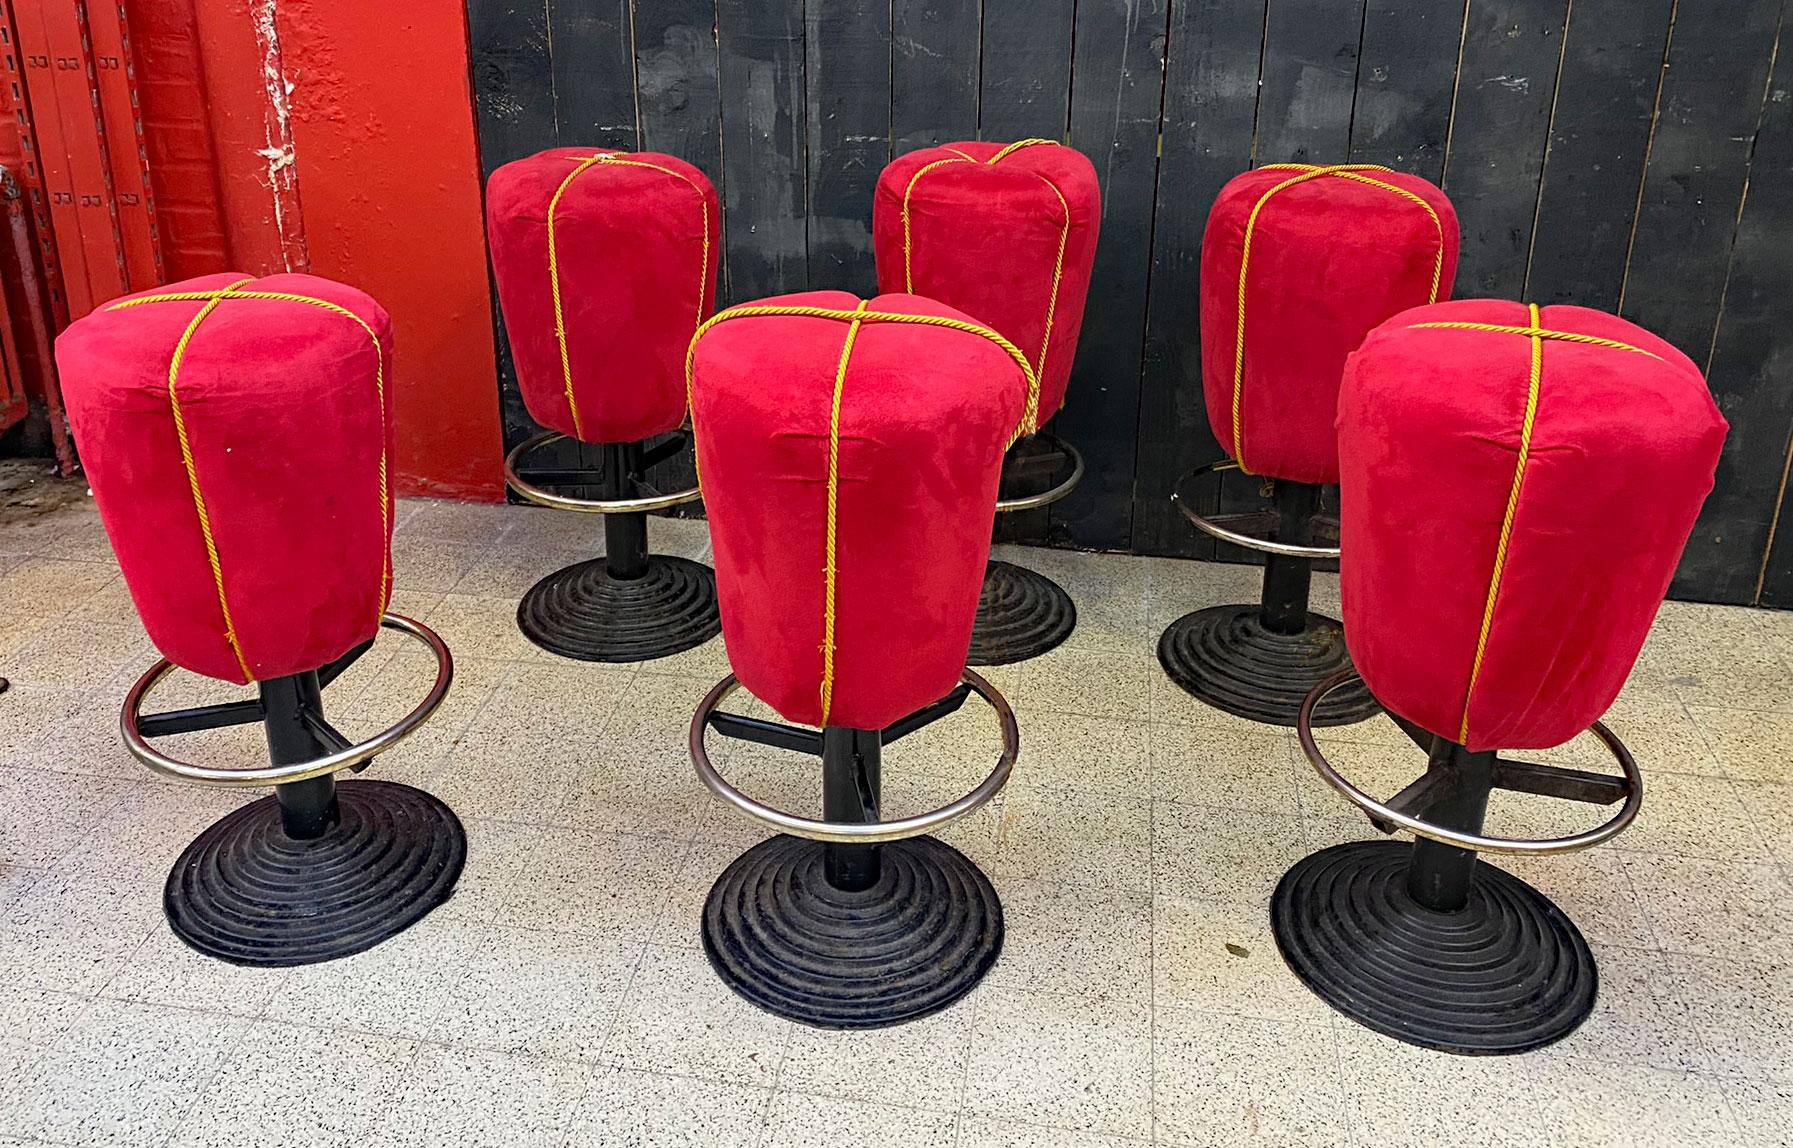 suite of 6 fun stools, cast iron base, seat covered in velvet;
the fabric is worn.